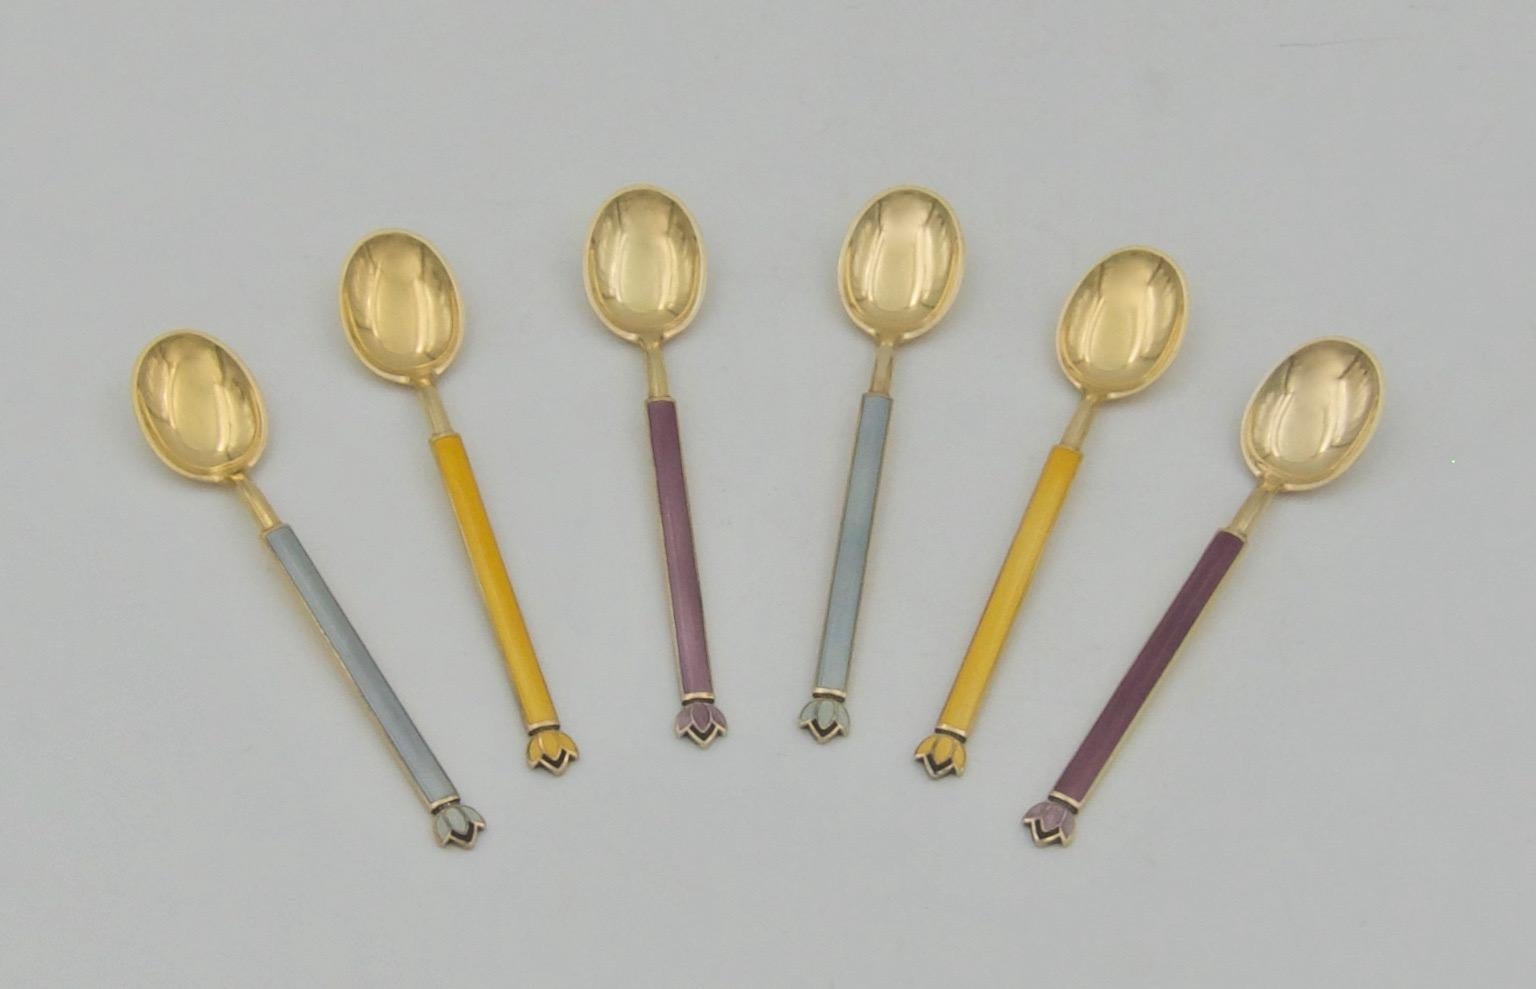 A vintage set of six sterling silver gilt and guilloche enamel spoons from Norwegian gold and silversmith firm, David Andersen, dating circa 1940s. The firm was founded 1876 in Christiania (now Oslo). Each solid silver spoon has a gold wash surface